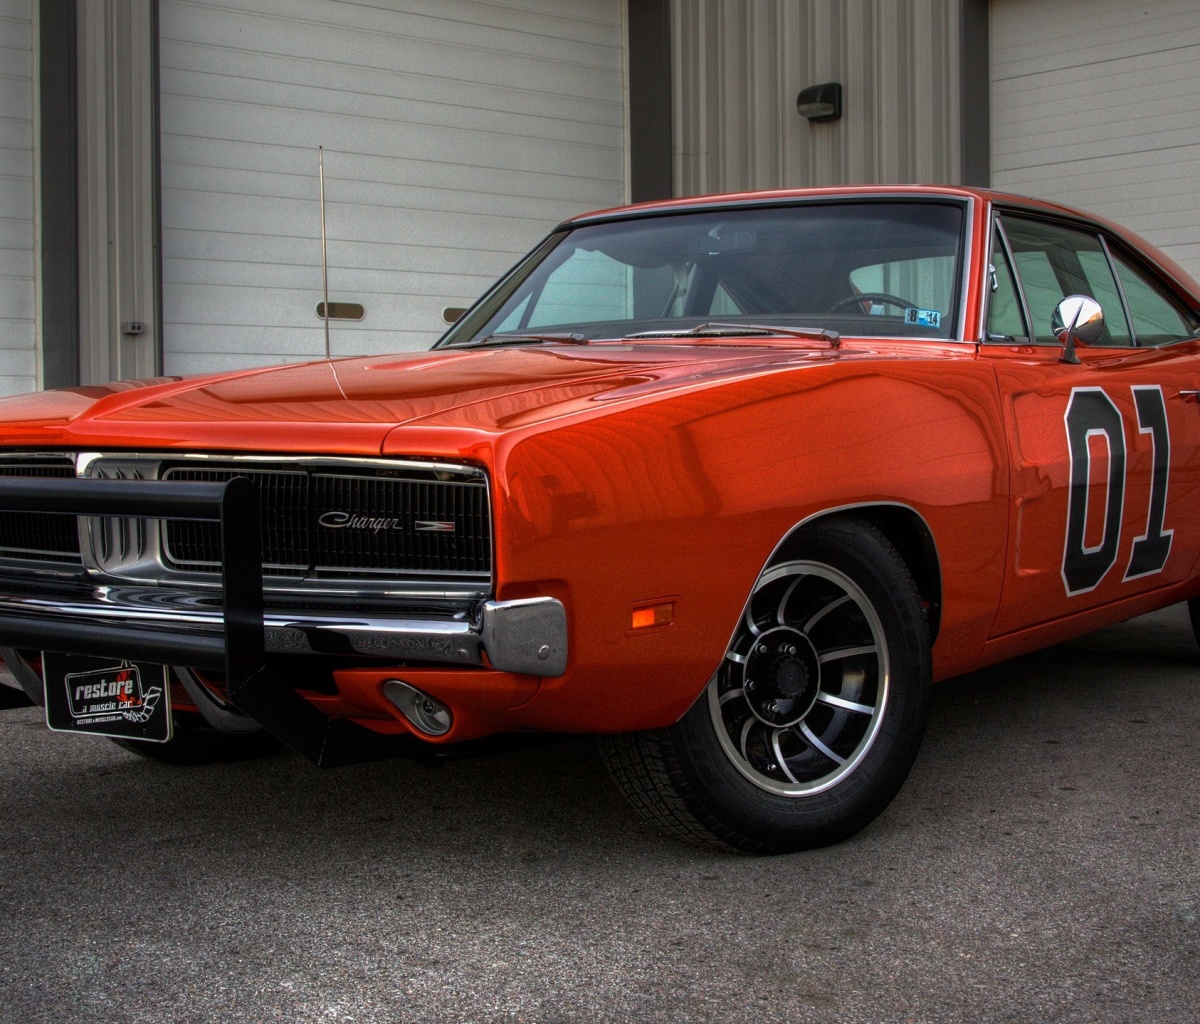 1969 Dodge Charger wallpaper 1200x1024